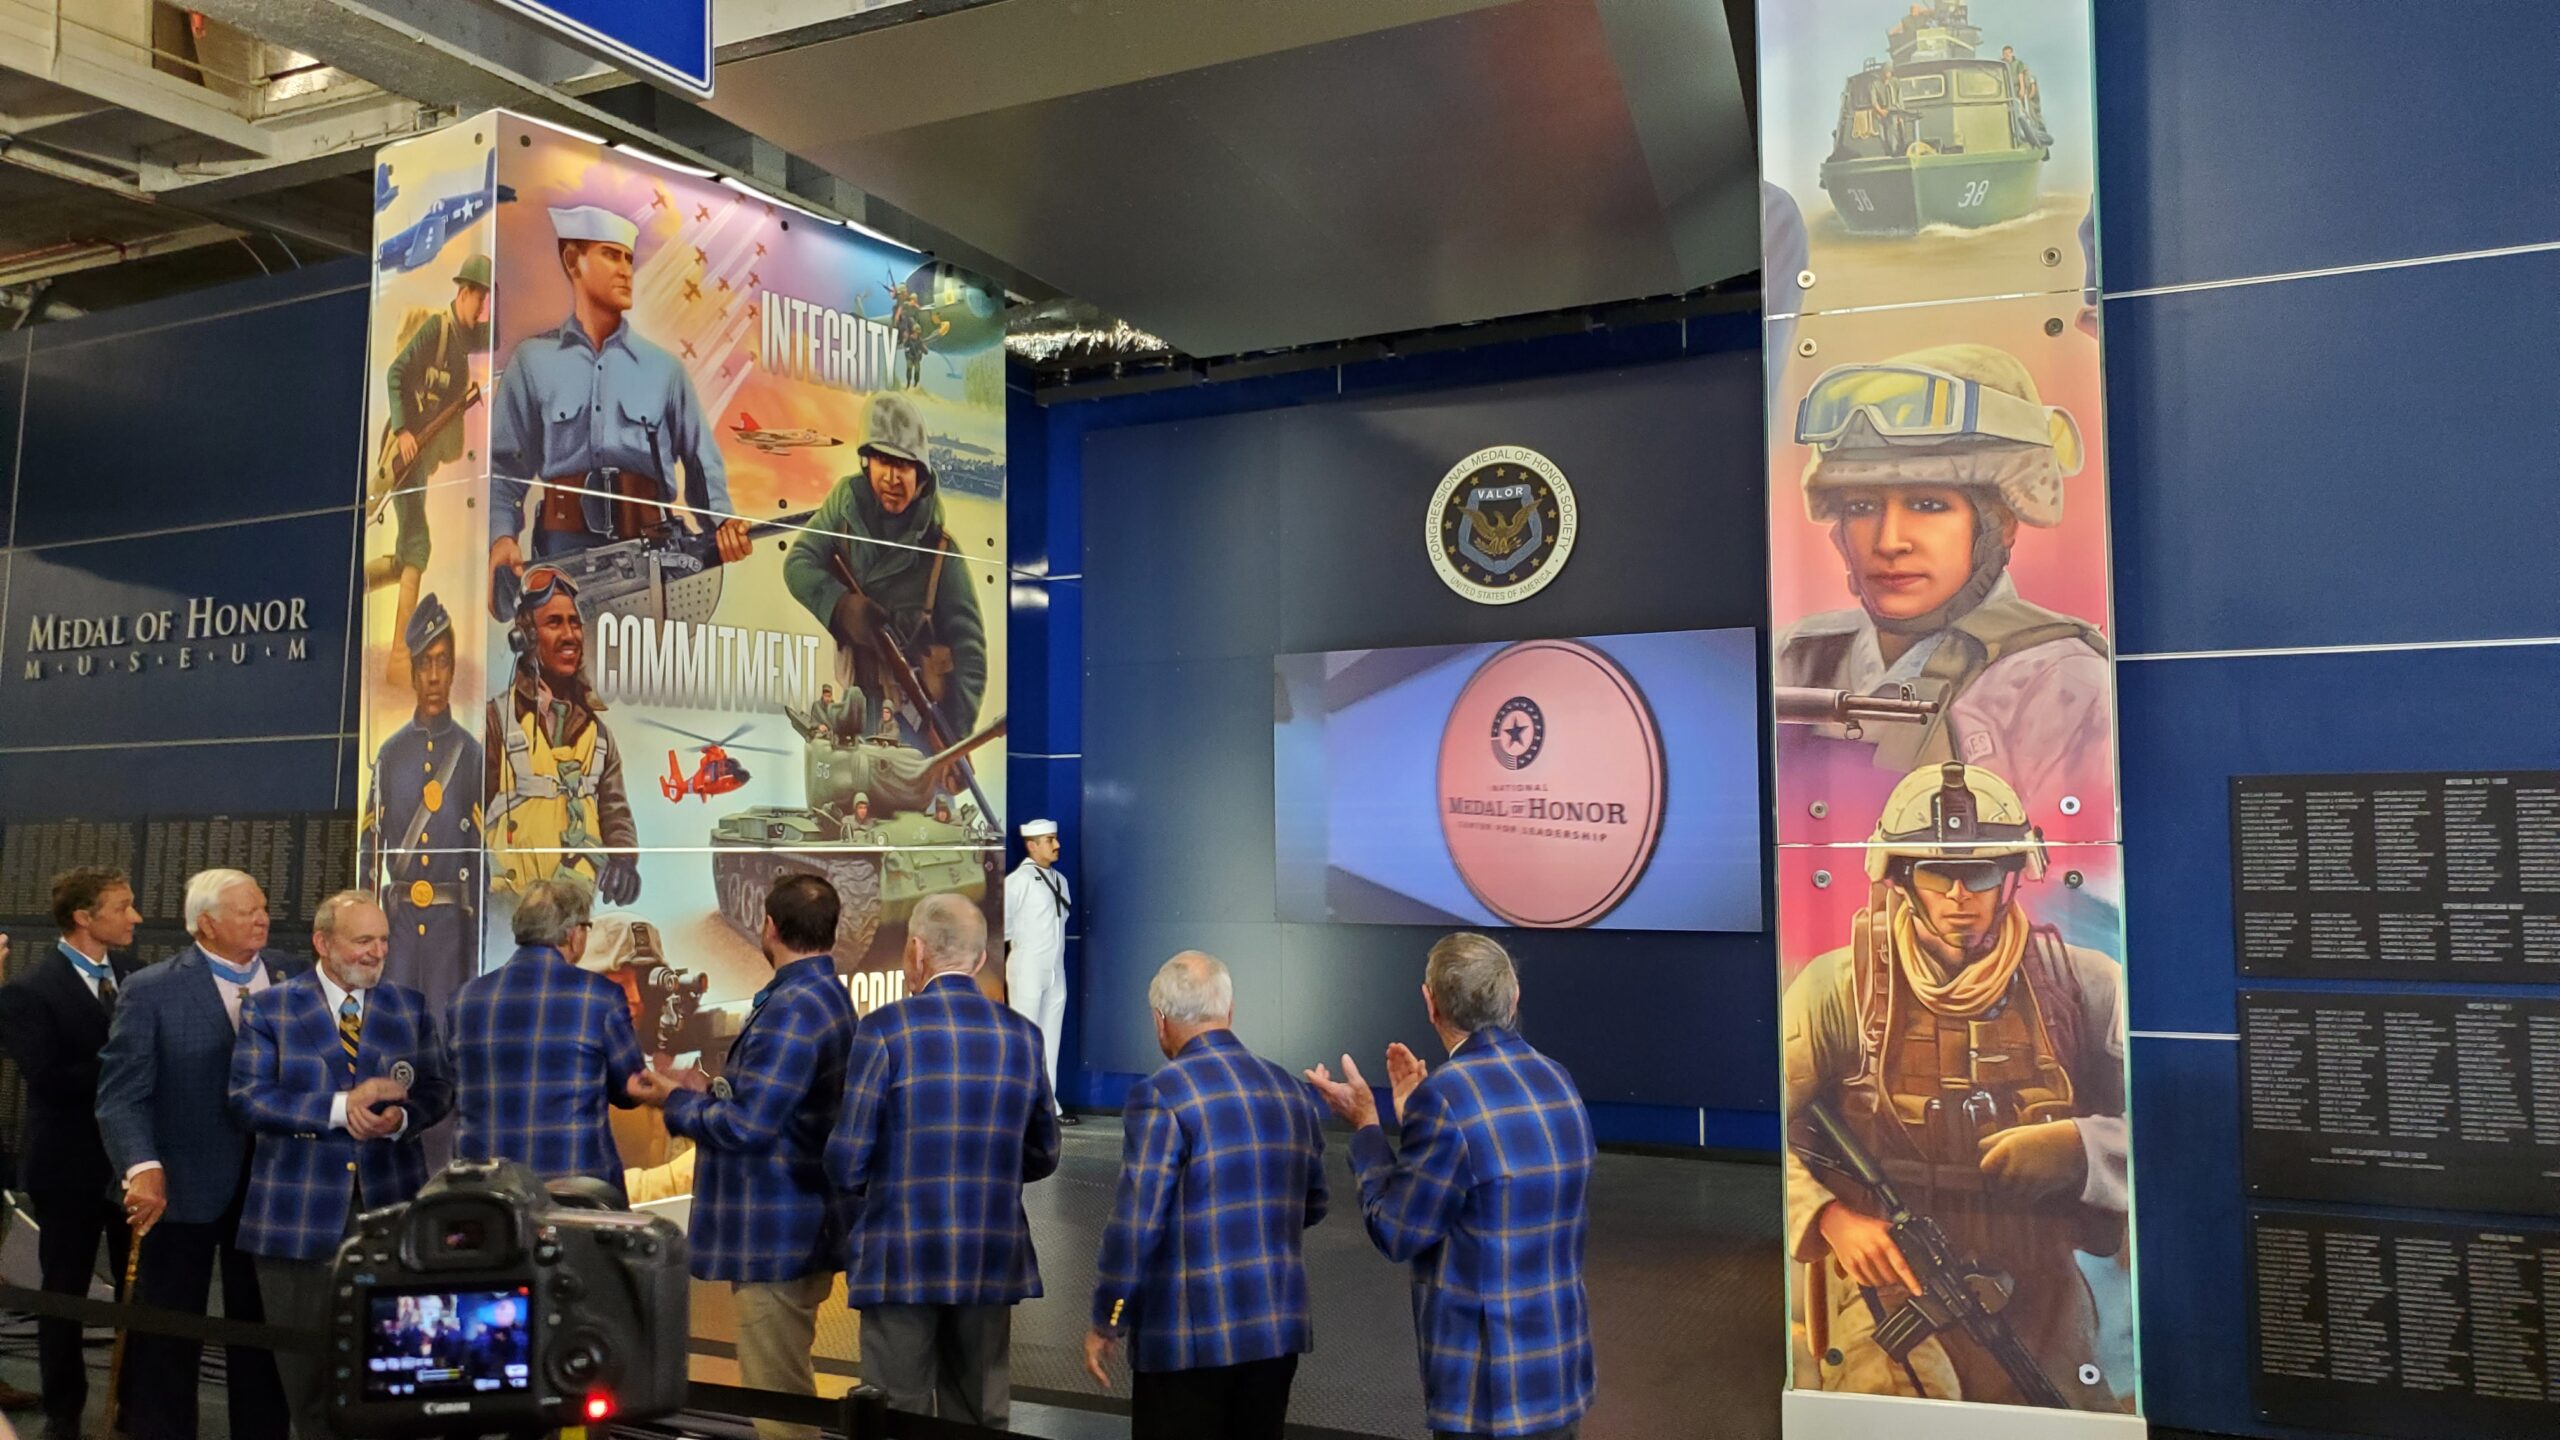 Medal of Honor Museum at Patriots Point Re-Opens with New Visitor Experiences after $3.5 million Renovation